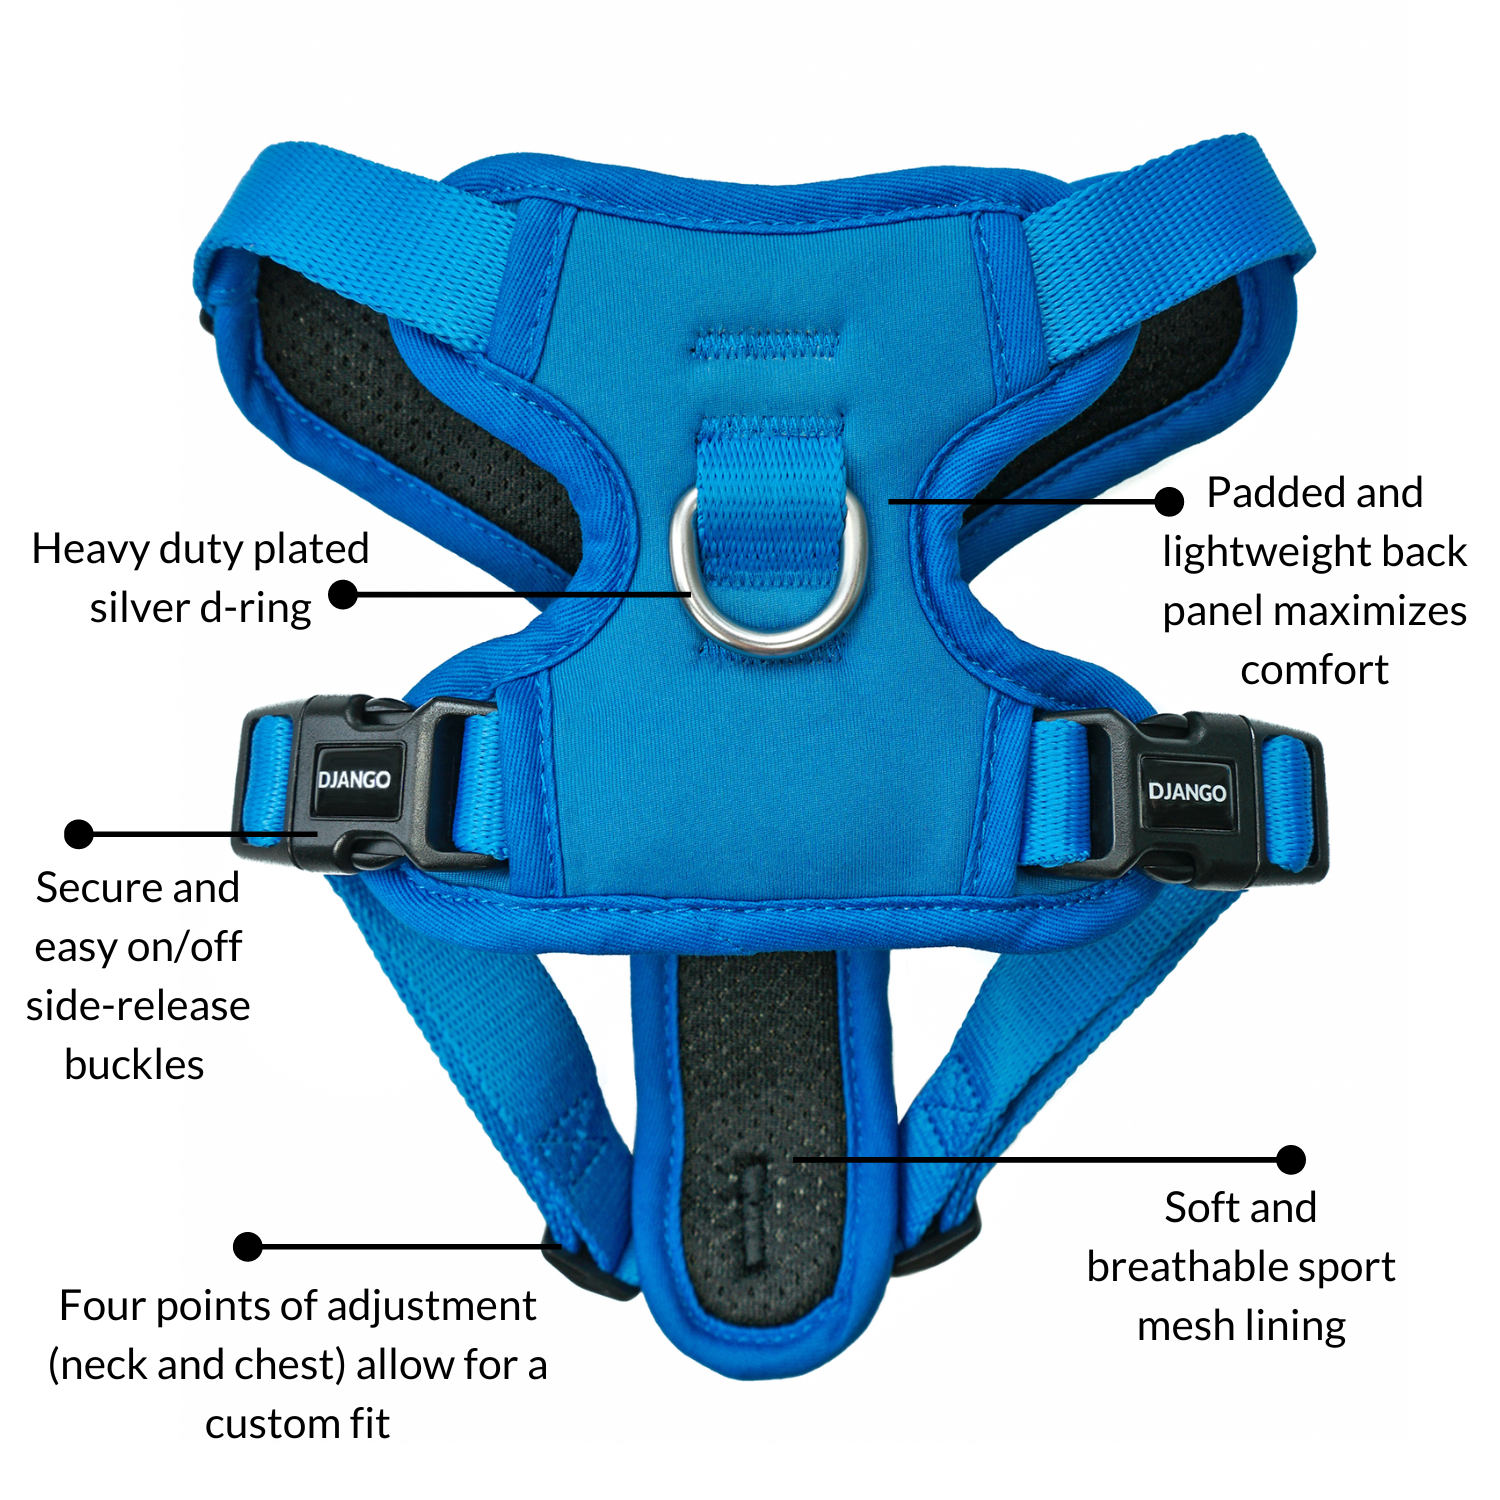 DJANGO Tahoe No Pull Dog Harness in Alpine Blue - Additional features include a padded and lightweight back panel for added comfort, soft and breathable mesh lining, four points of adjustment, secure and easy on/off buckles, and heavy duty plated silver hardware. - djangobrand.com